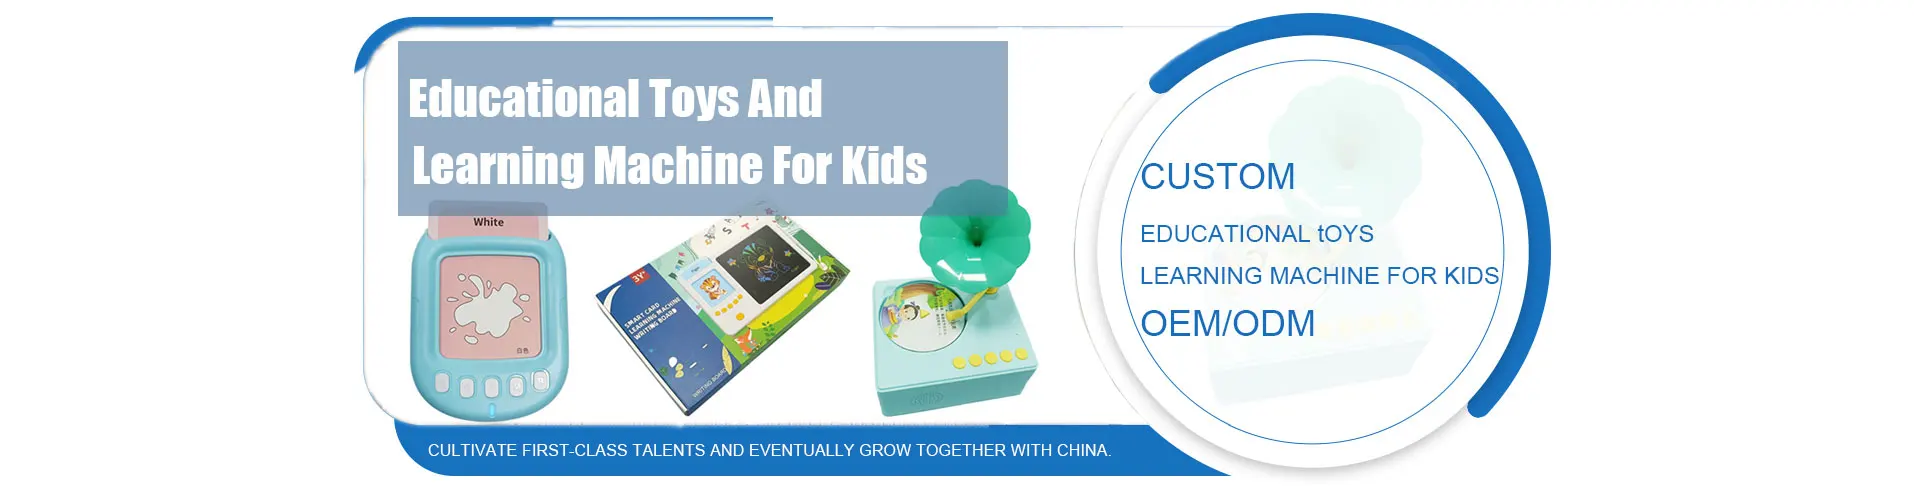 OEM/ODM Educational Toys And Learning Machine For Kids